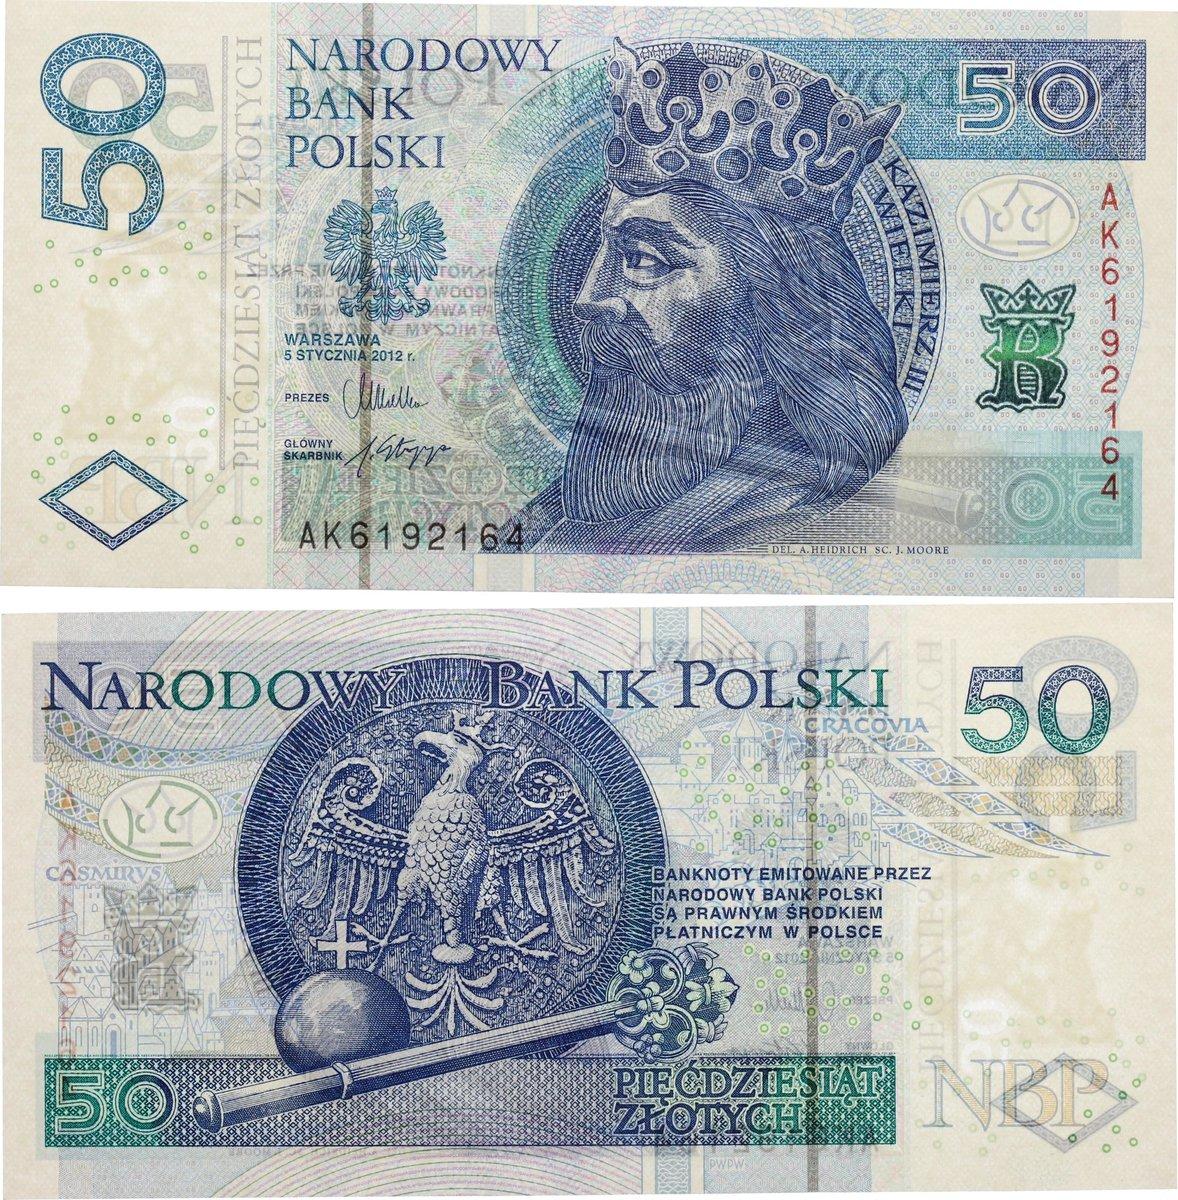 POLAND 20 Zlotych Banknote World Paper Money UNC Currency Pick p149 Bill Note